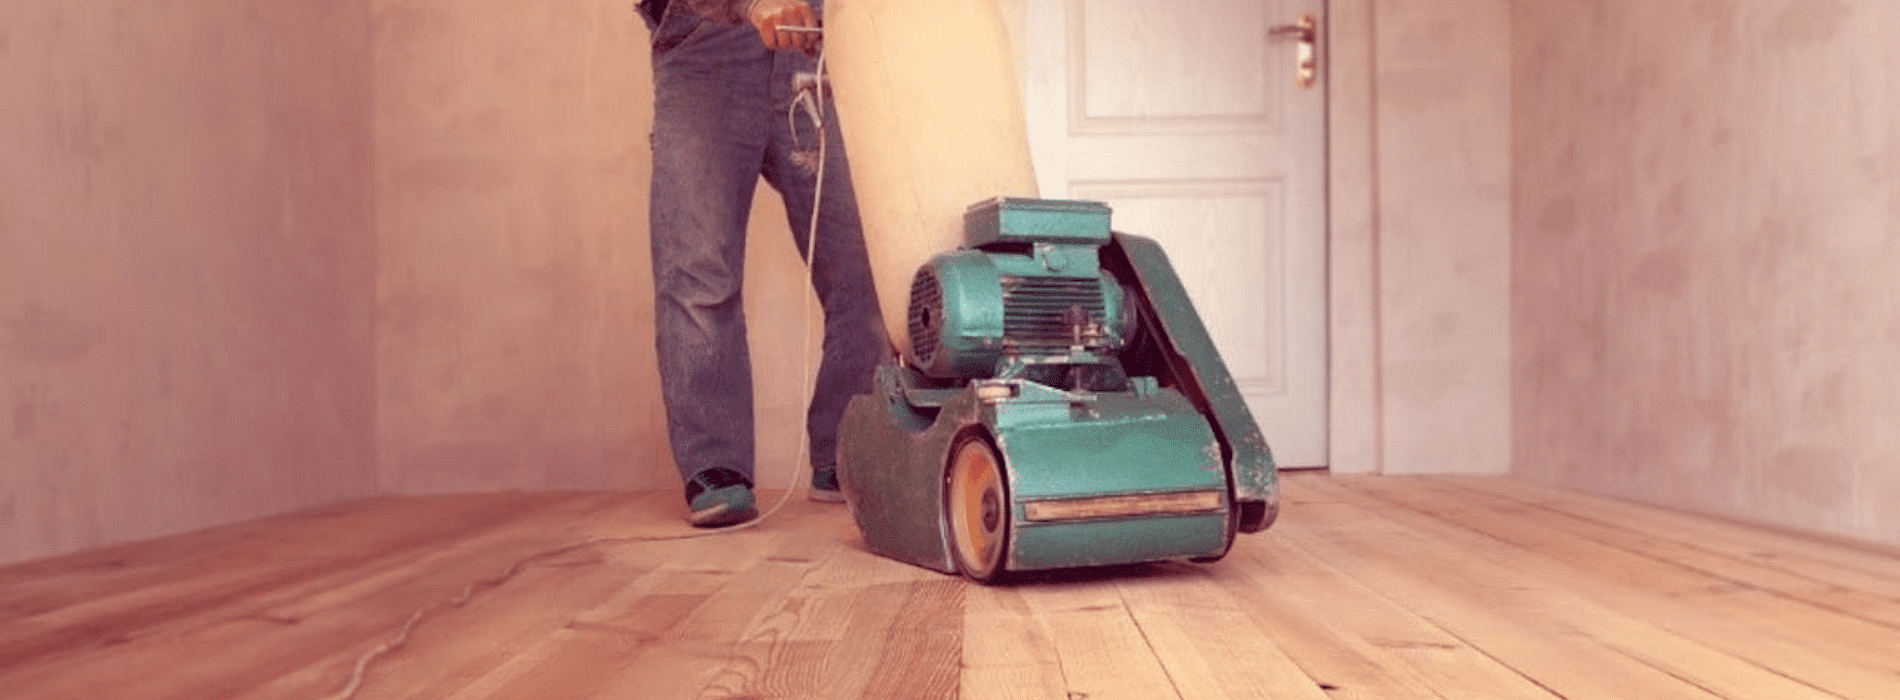 Mr Sander® skillfully sanding a herringbone floor using the powerful 2.2 kW Bona belt sander in Barkingside, IG6. The 220V, 60Hz machine, sized 250x750 mm, ensures exceptional results. The dust extraction system with HEPA filter guarantees cleanliness and efficiency for a flawless finish.